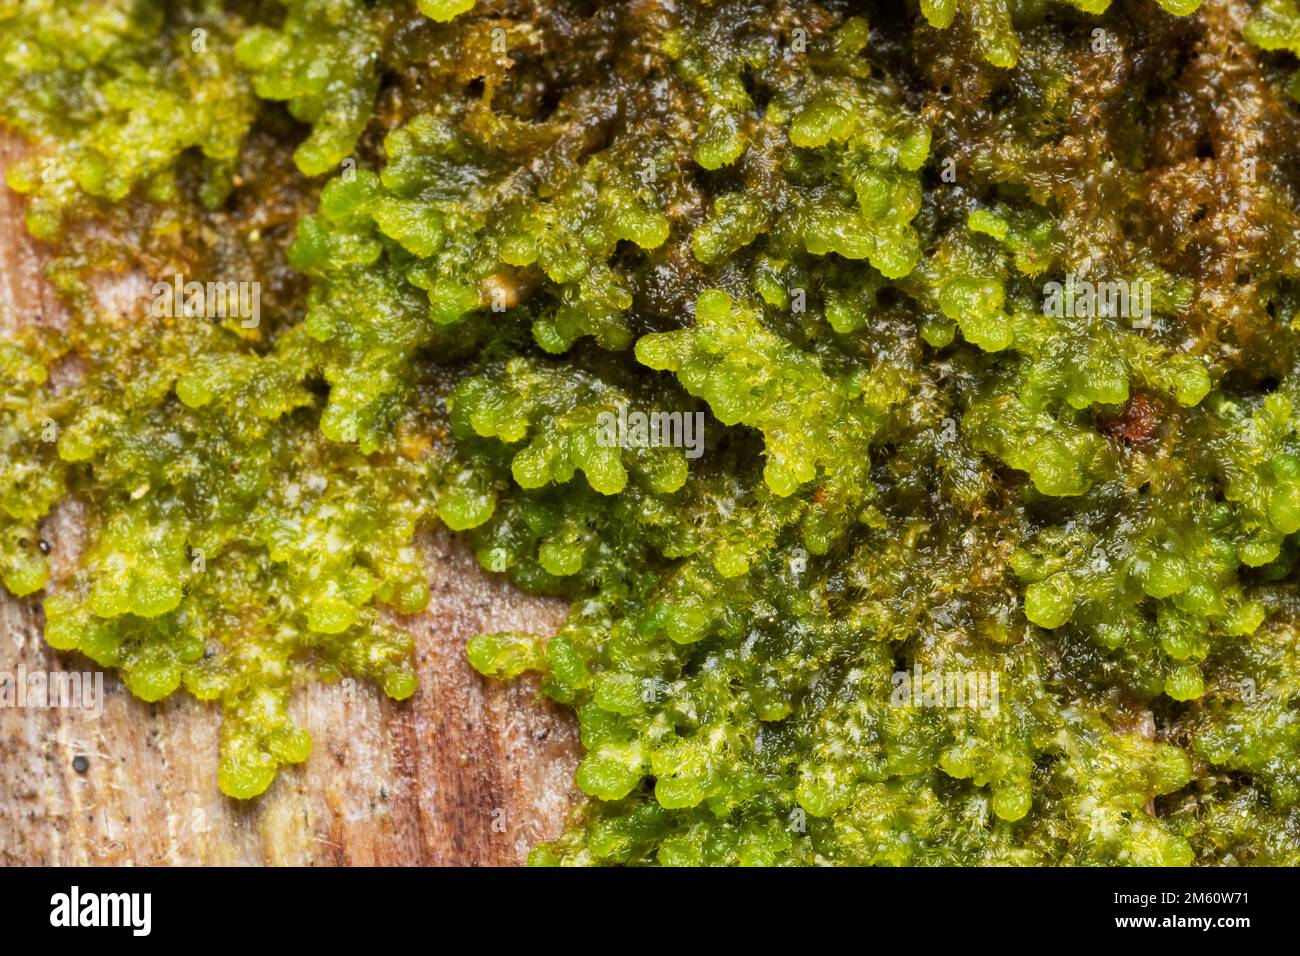 A close-up of Tree fringewort growing on a decaying wood in an old-growth forest in Estonia, Northern Europe Stock Photo